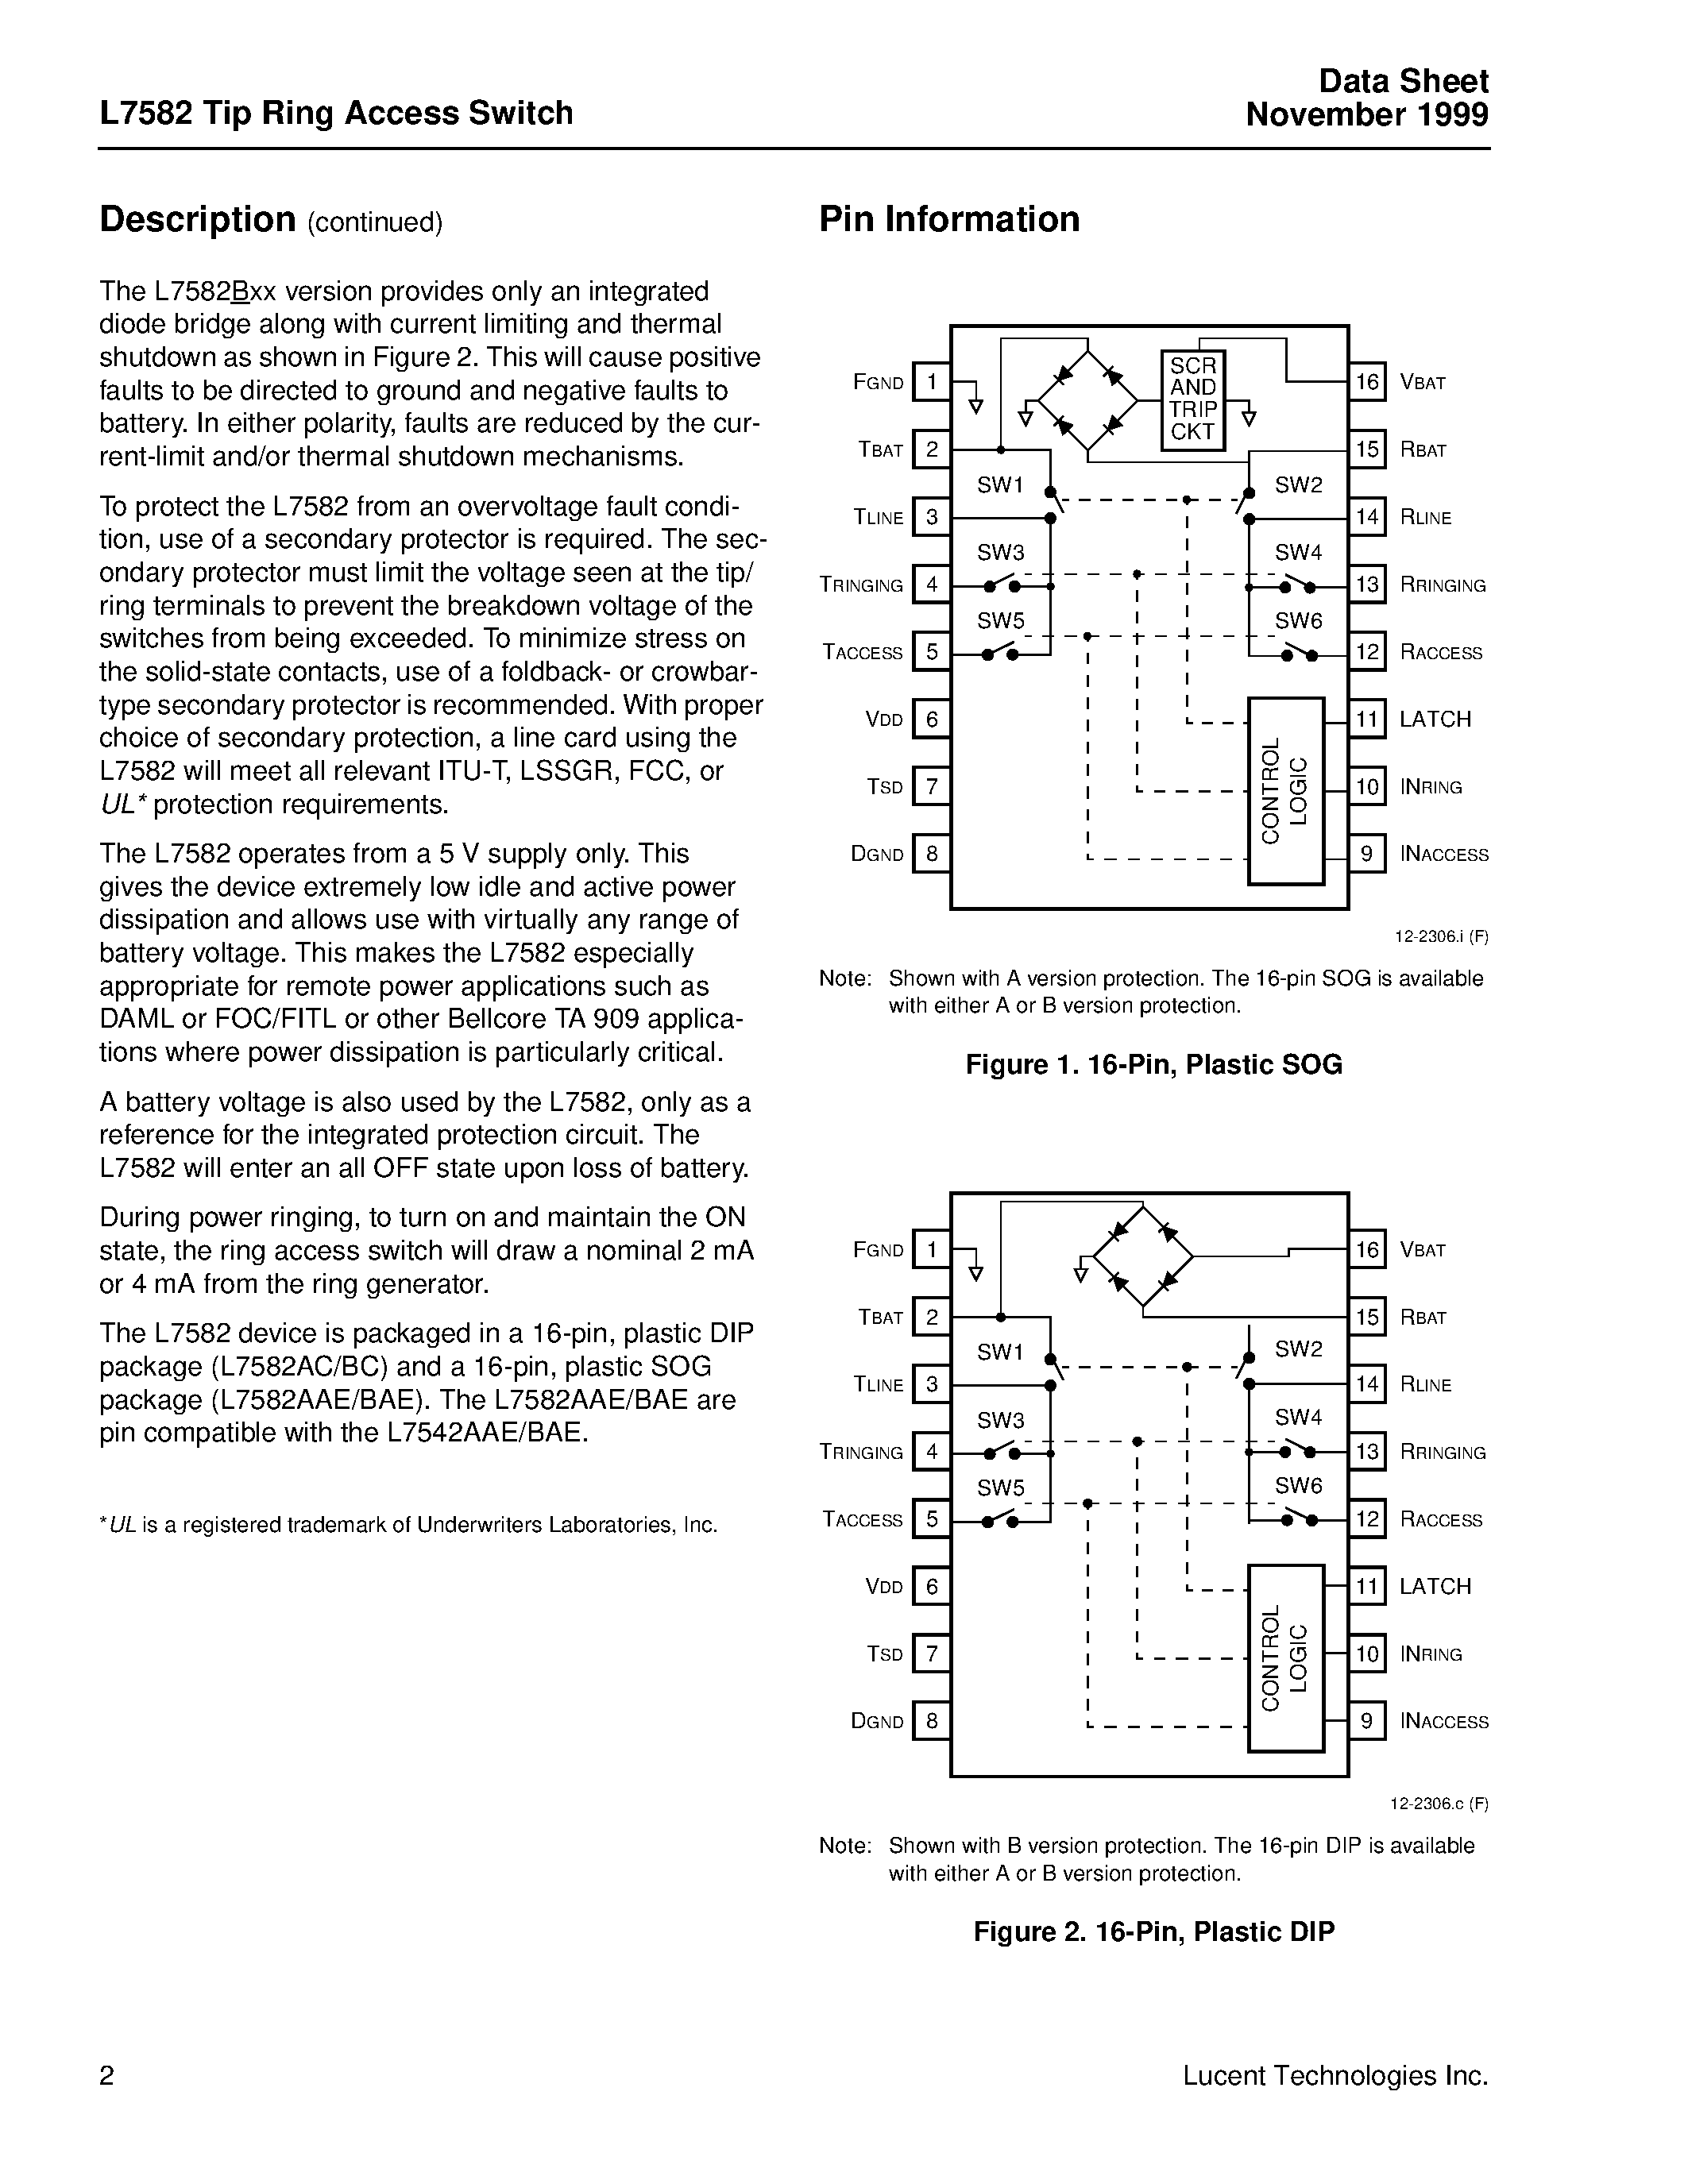 Datasheet ATTL7582BAE-TR - Tip Ring Access Switch page 2